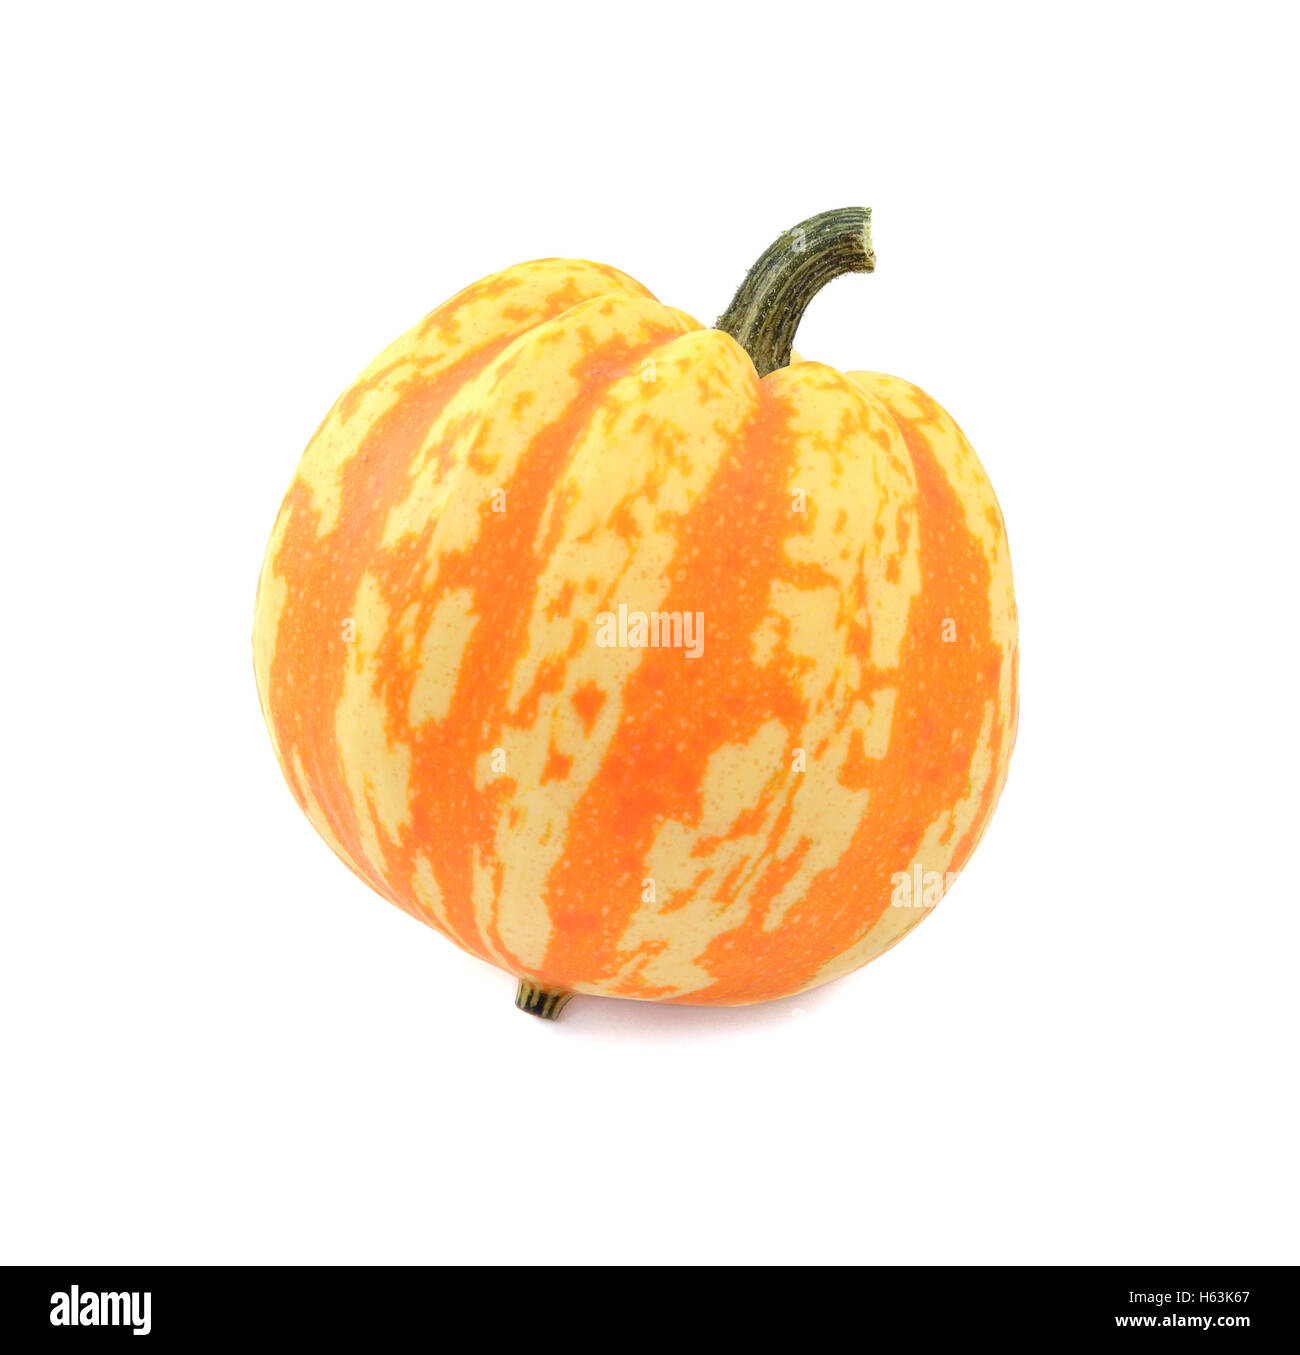 Festival squash with orange and yellow stripes, isolated on a white background Stock Photo